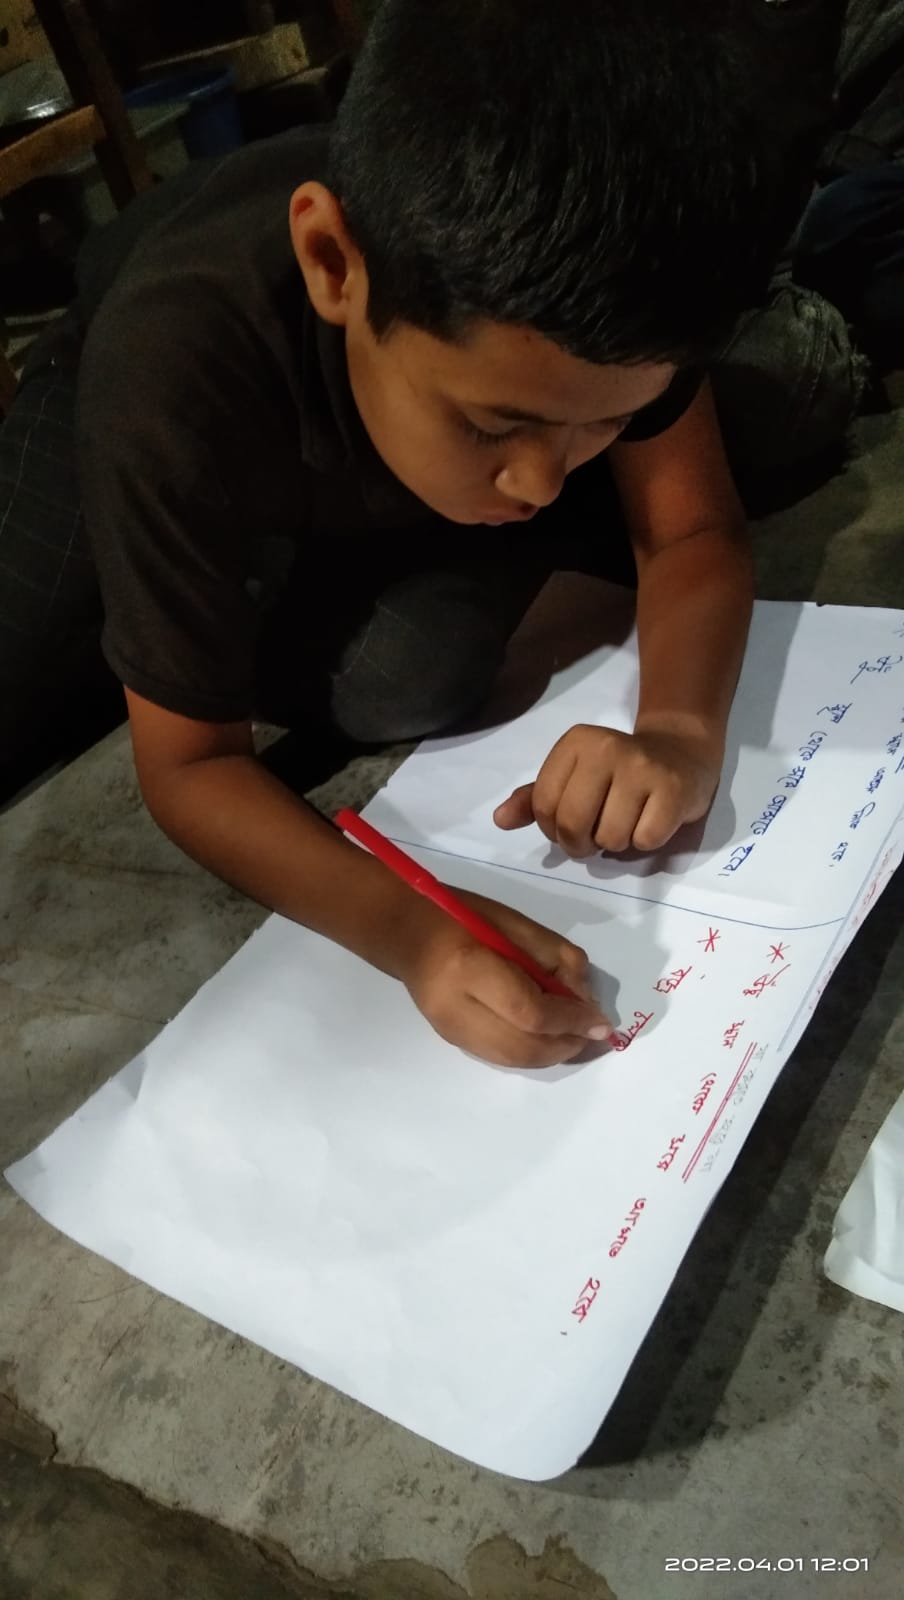 Sohel making a poster on thunderstorm